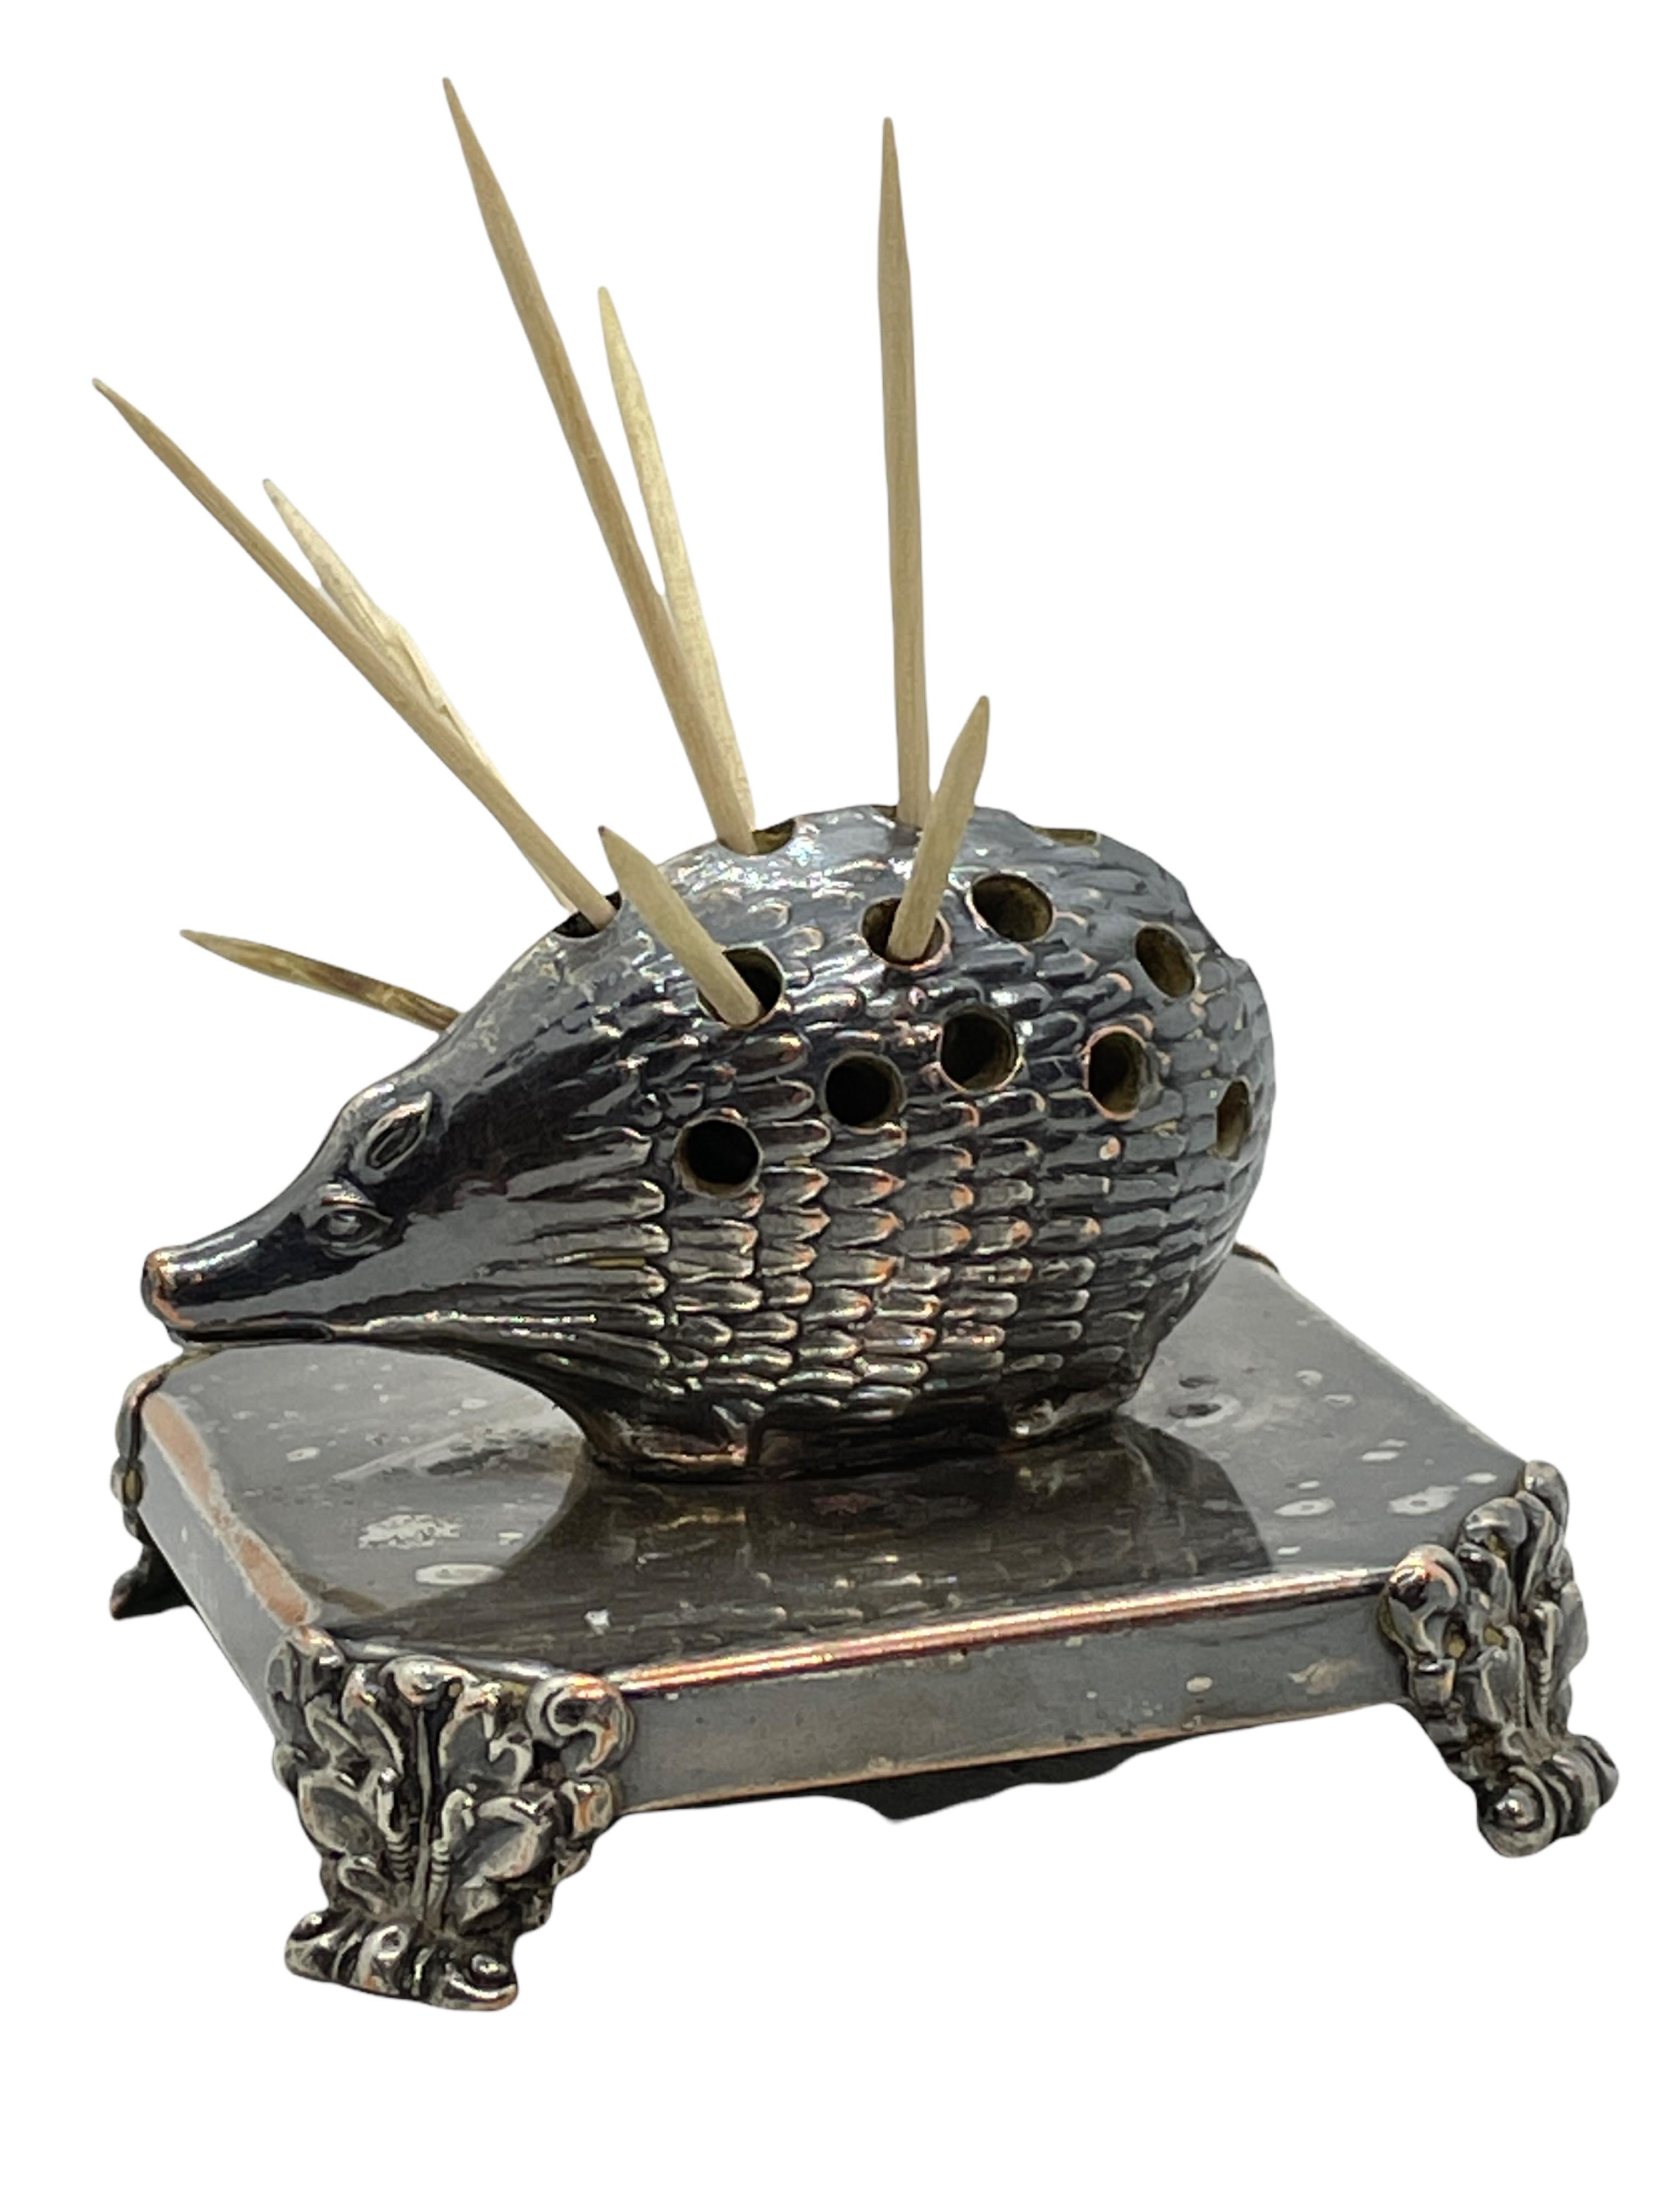 An antique decorative toothpick holder figure. Made of silver plated metal. A nice original antique item for displaying or just to use on your table. Toothpicks shown in pictures are not included in this offer. It is in the original as found